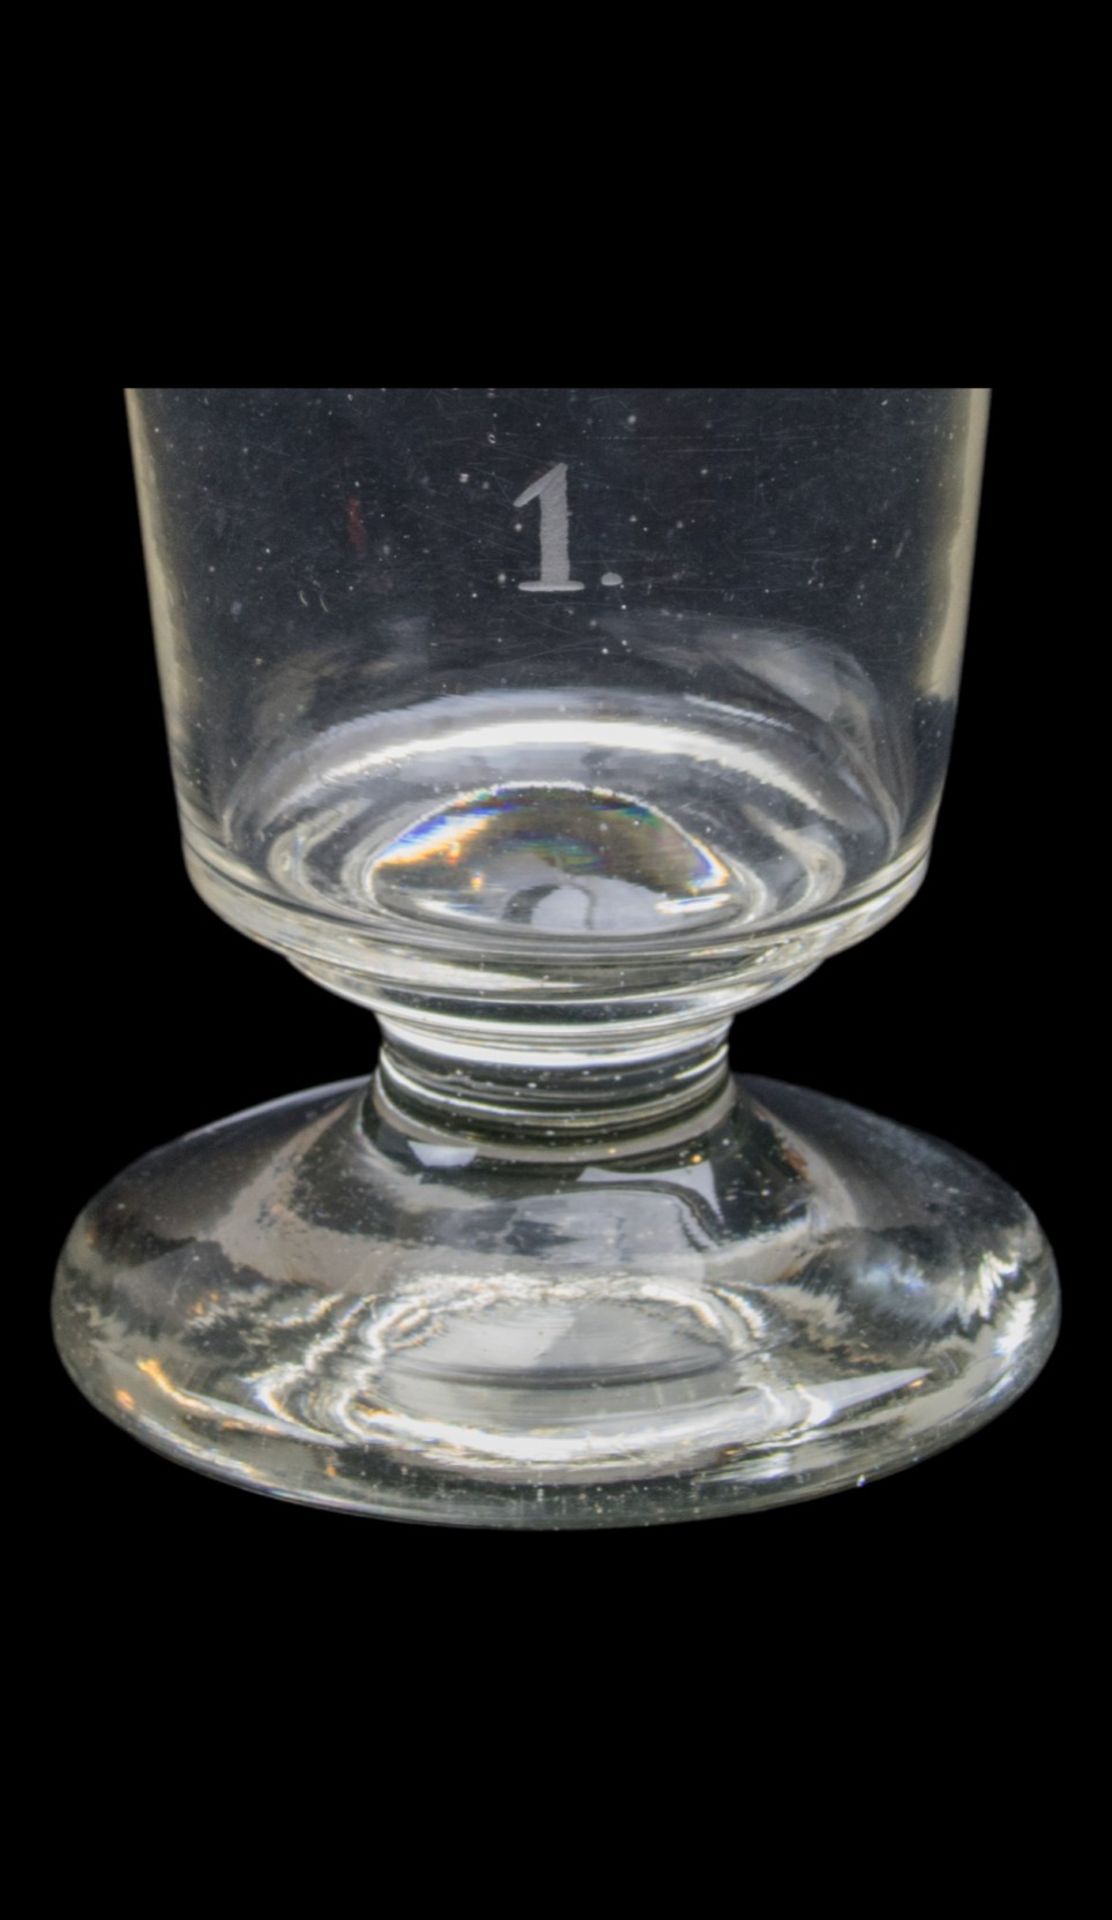 ADOLF HITLER'S NUMBERED BEER GLASS FROM THE BURGERBRAUKELLER - Image 7 of 7